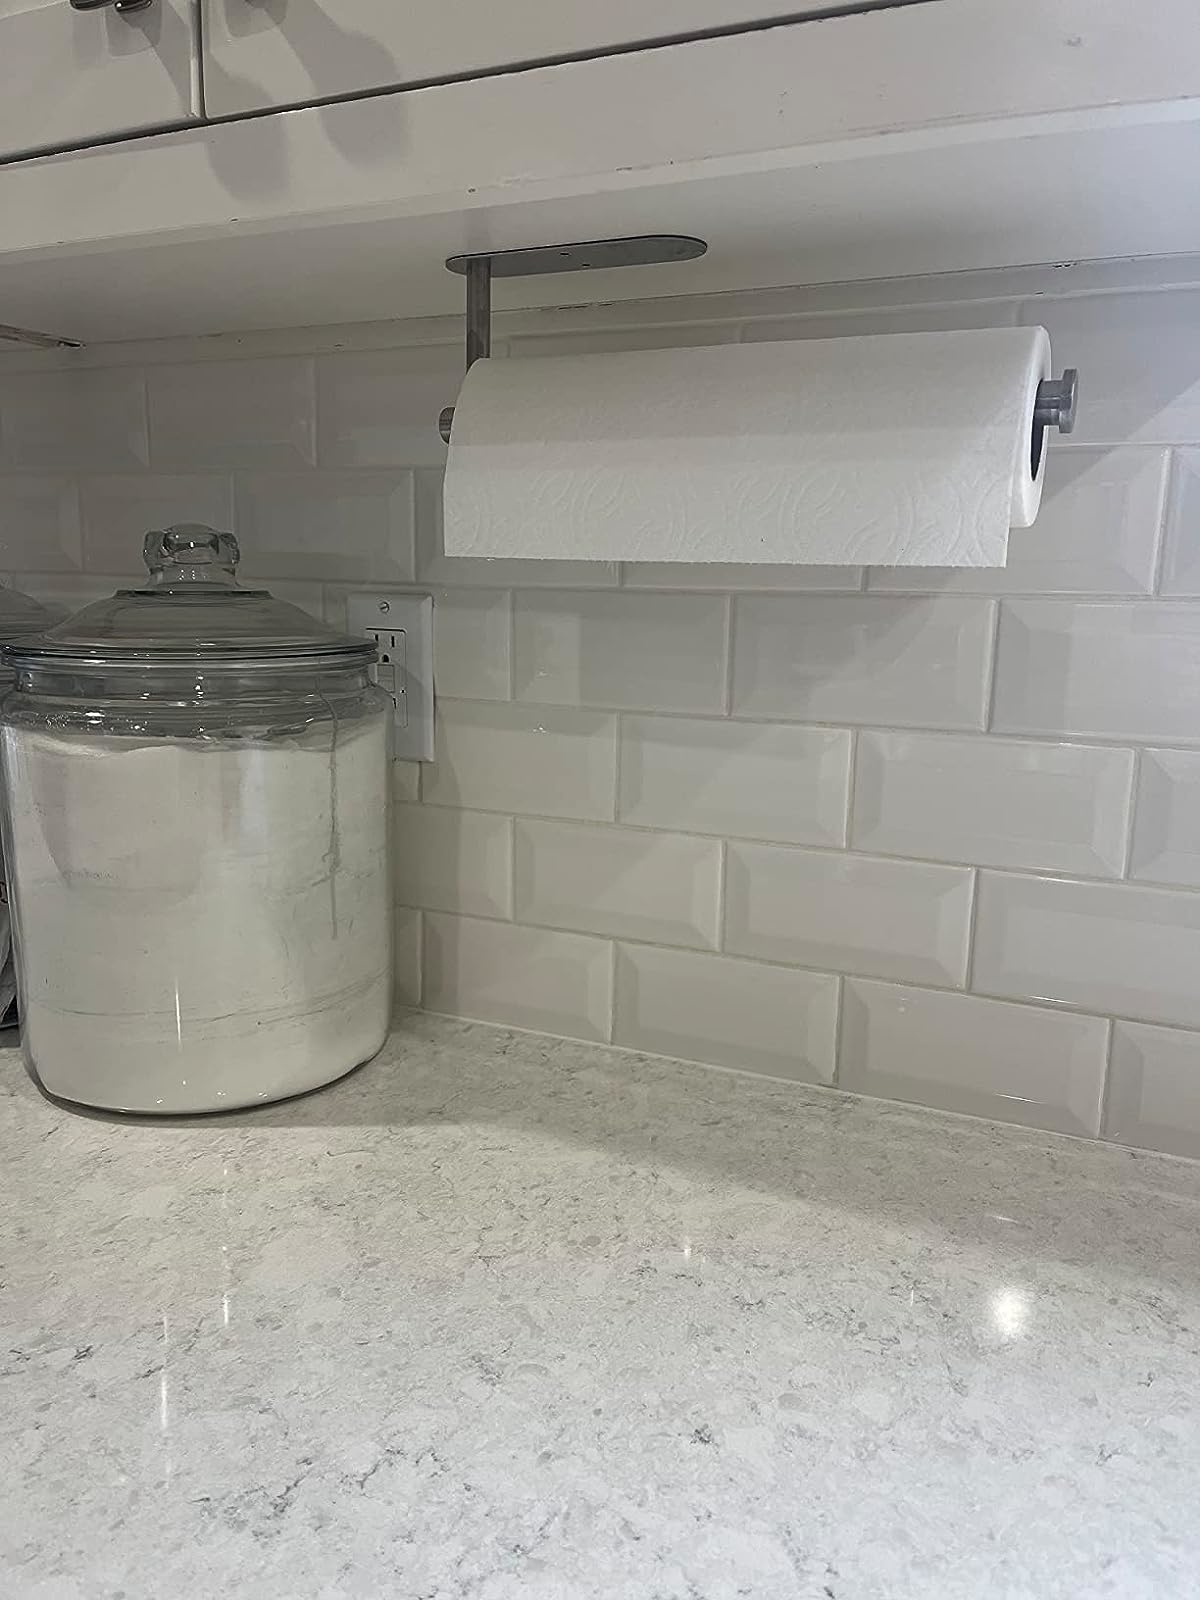 Reviewer image of paper towels on holder in a white kitchen